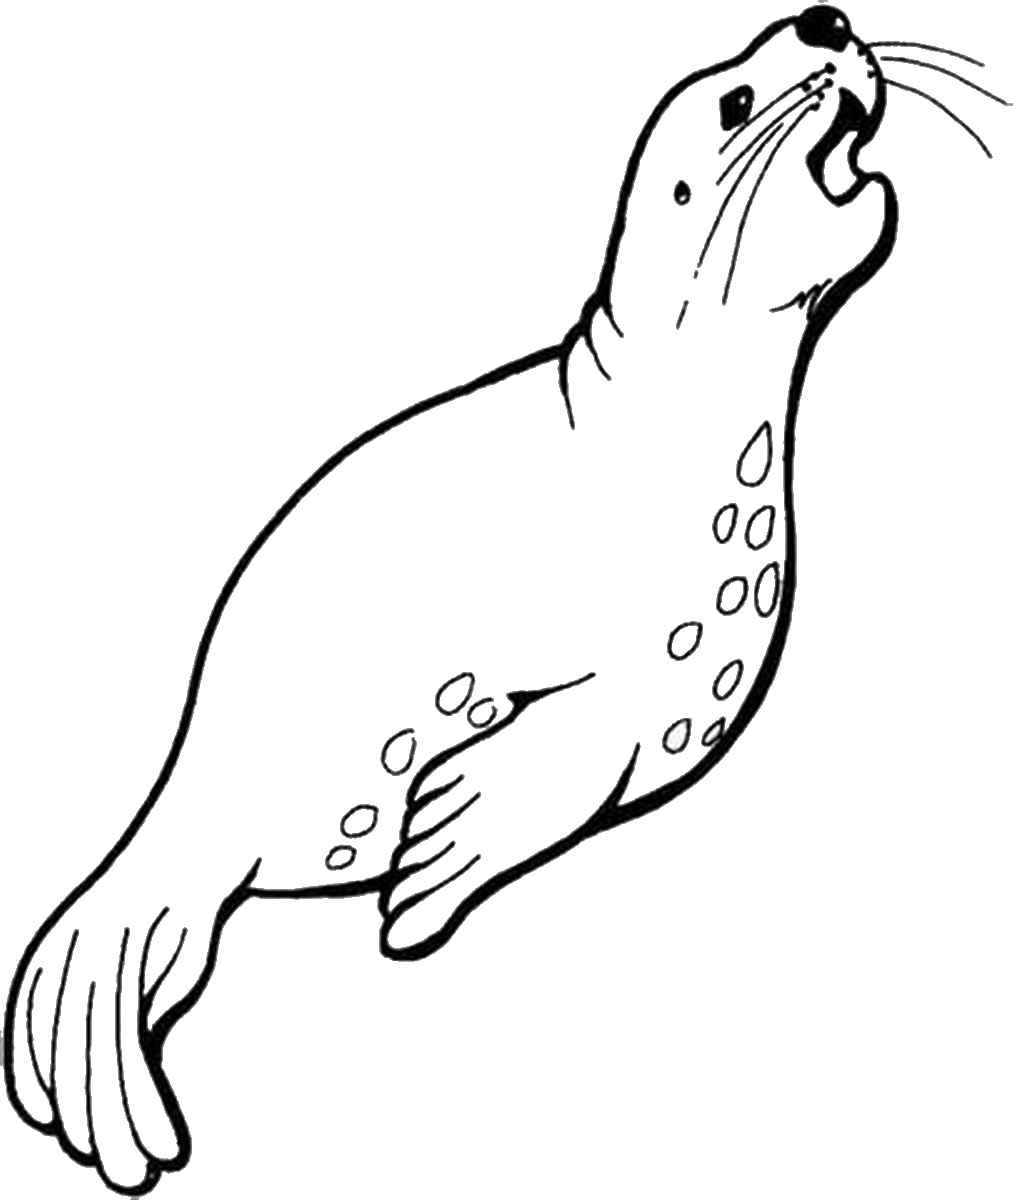 Leopard seal coloring pages download and print for free